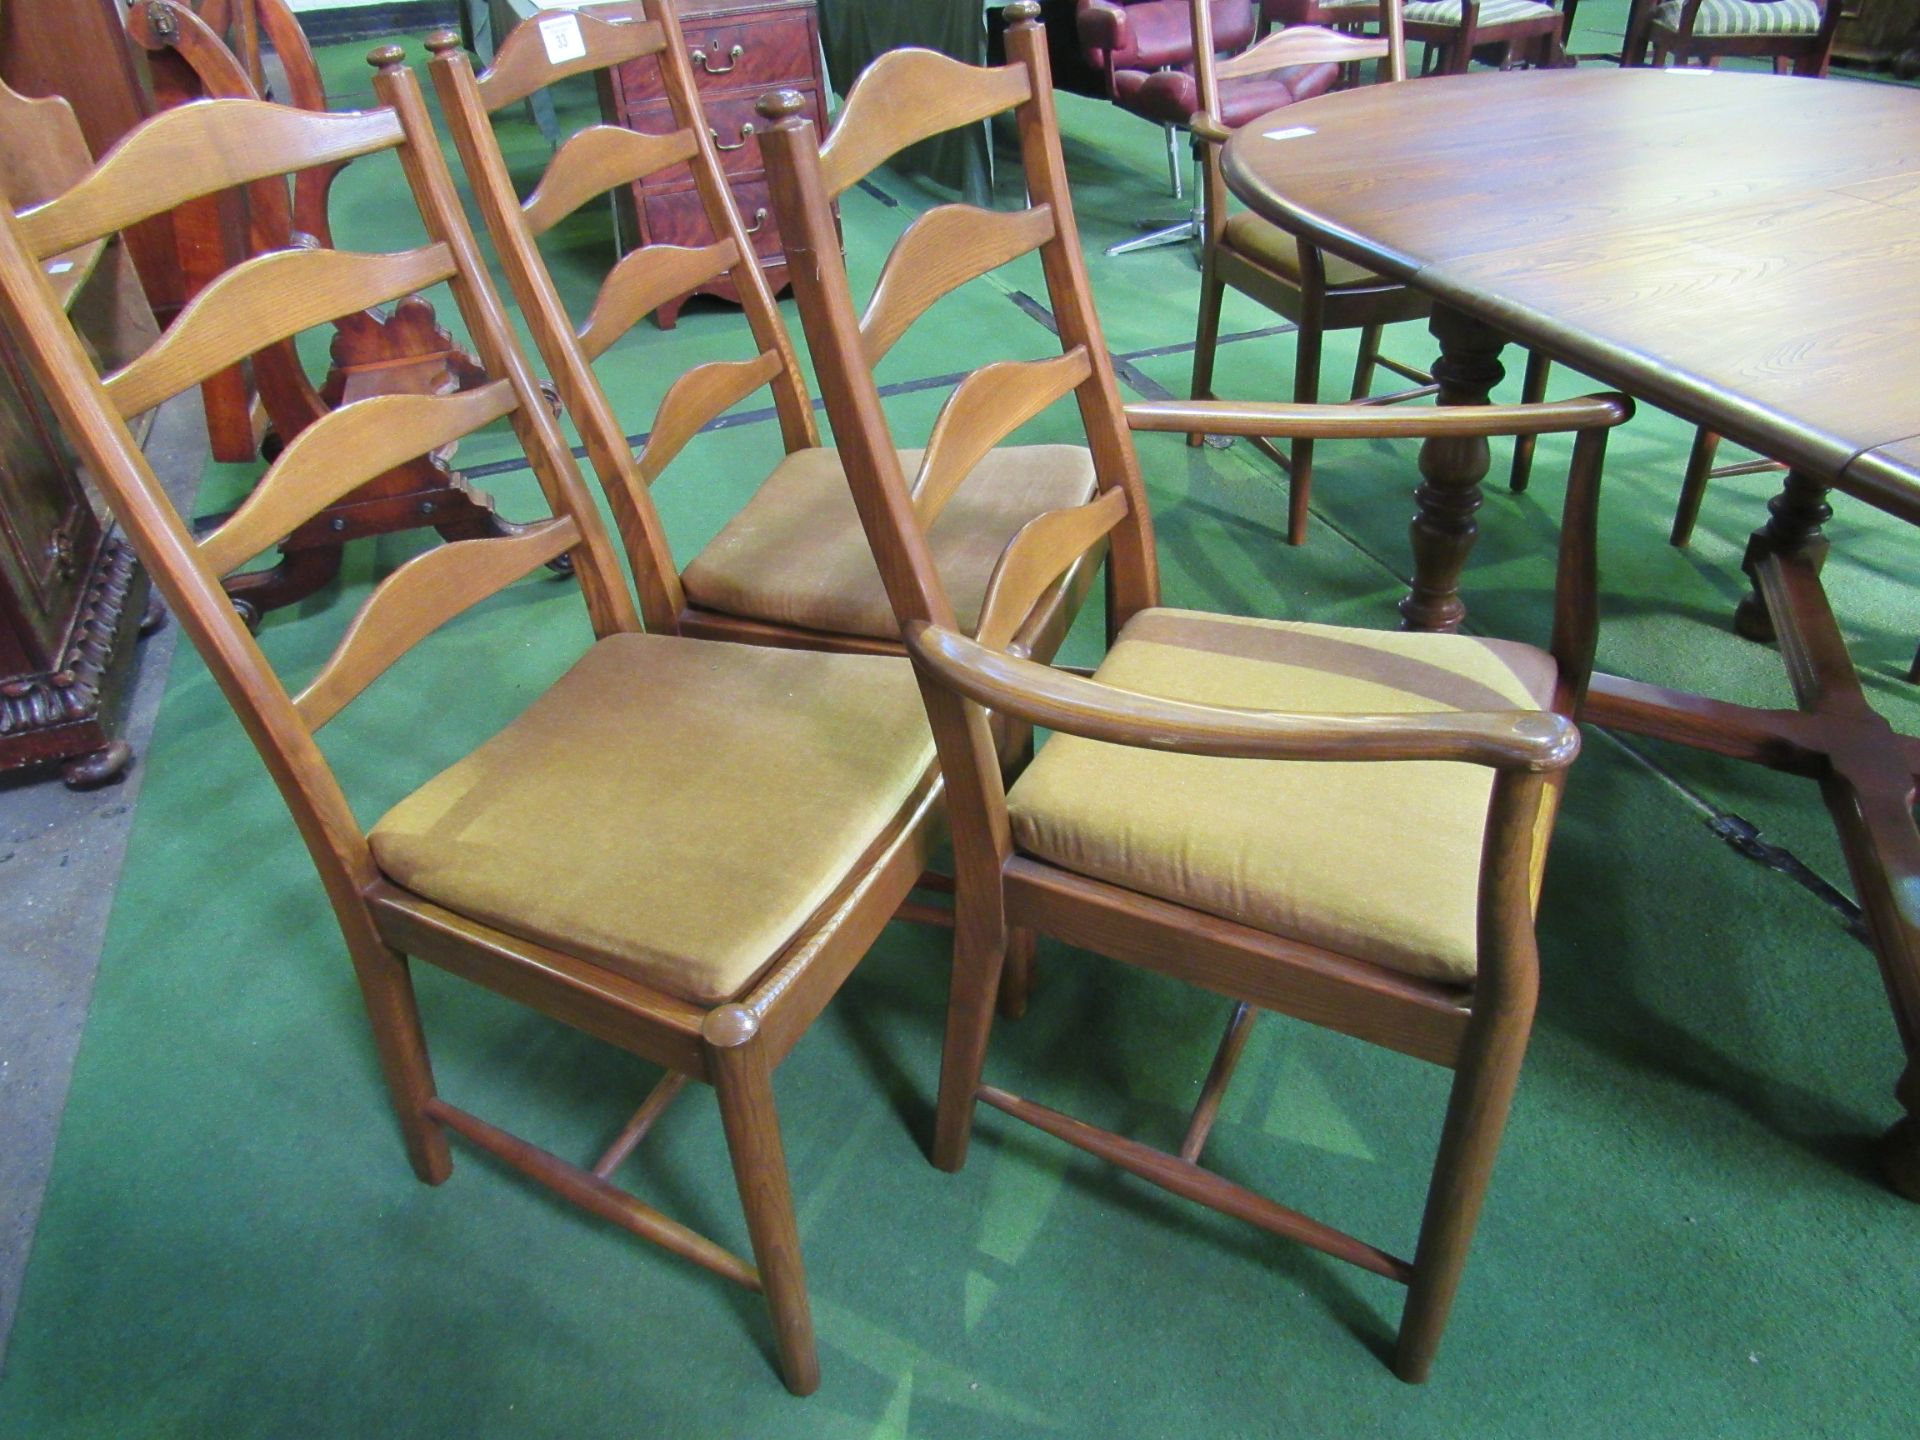 2 + 4 Ercol ladder back dining chairs to suit lot 32. Estimate £120-150. - Image 2 of 3